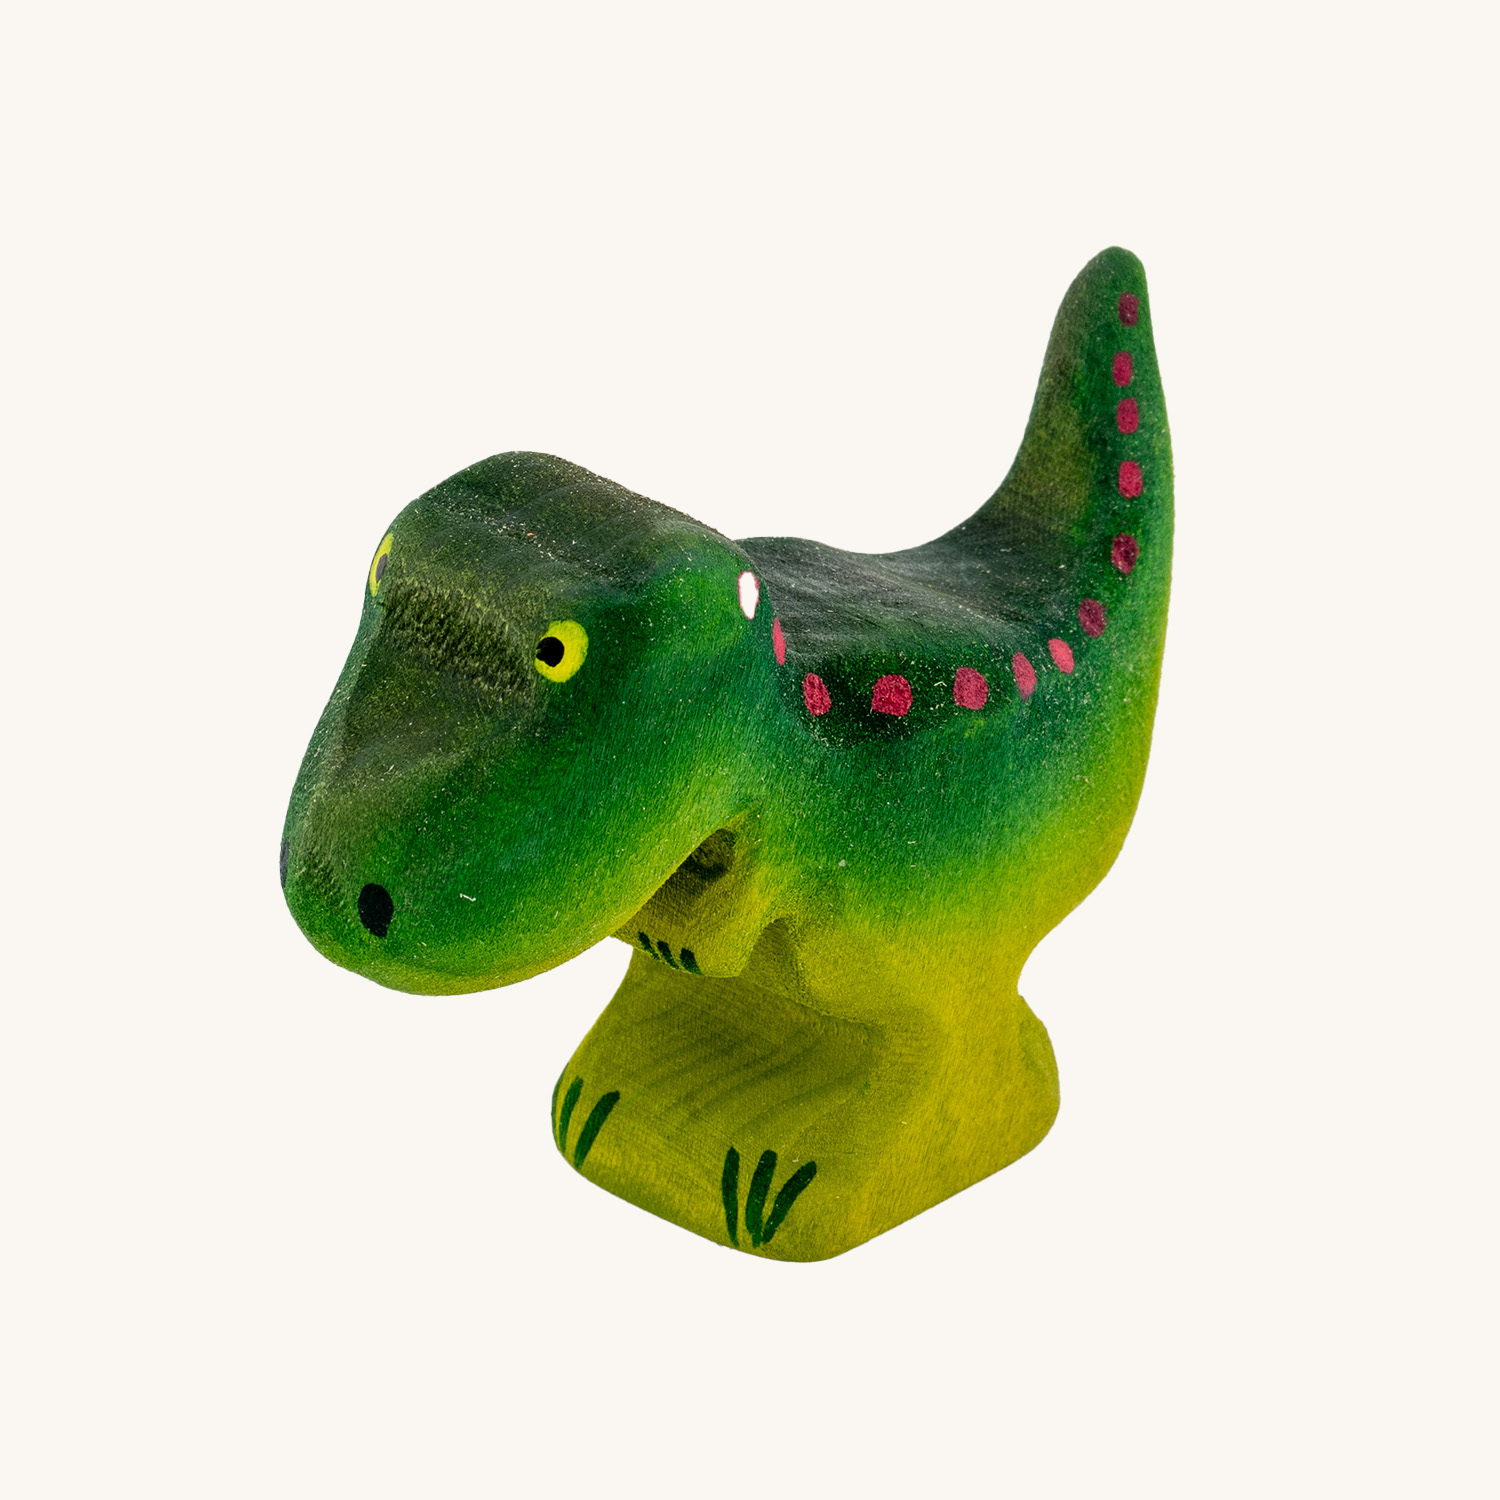 Organic Cotton Dinosaur Baby Rattle Toy - Non-Toxic and Eco